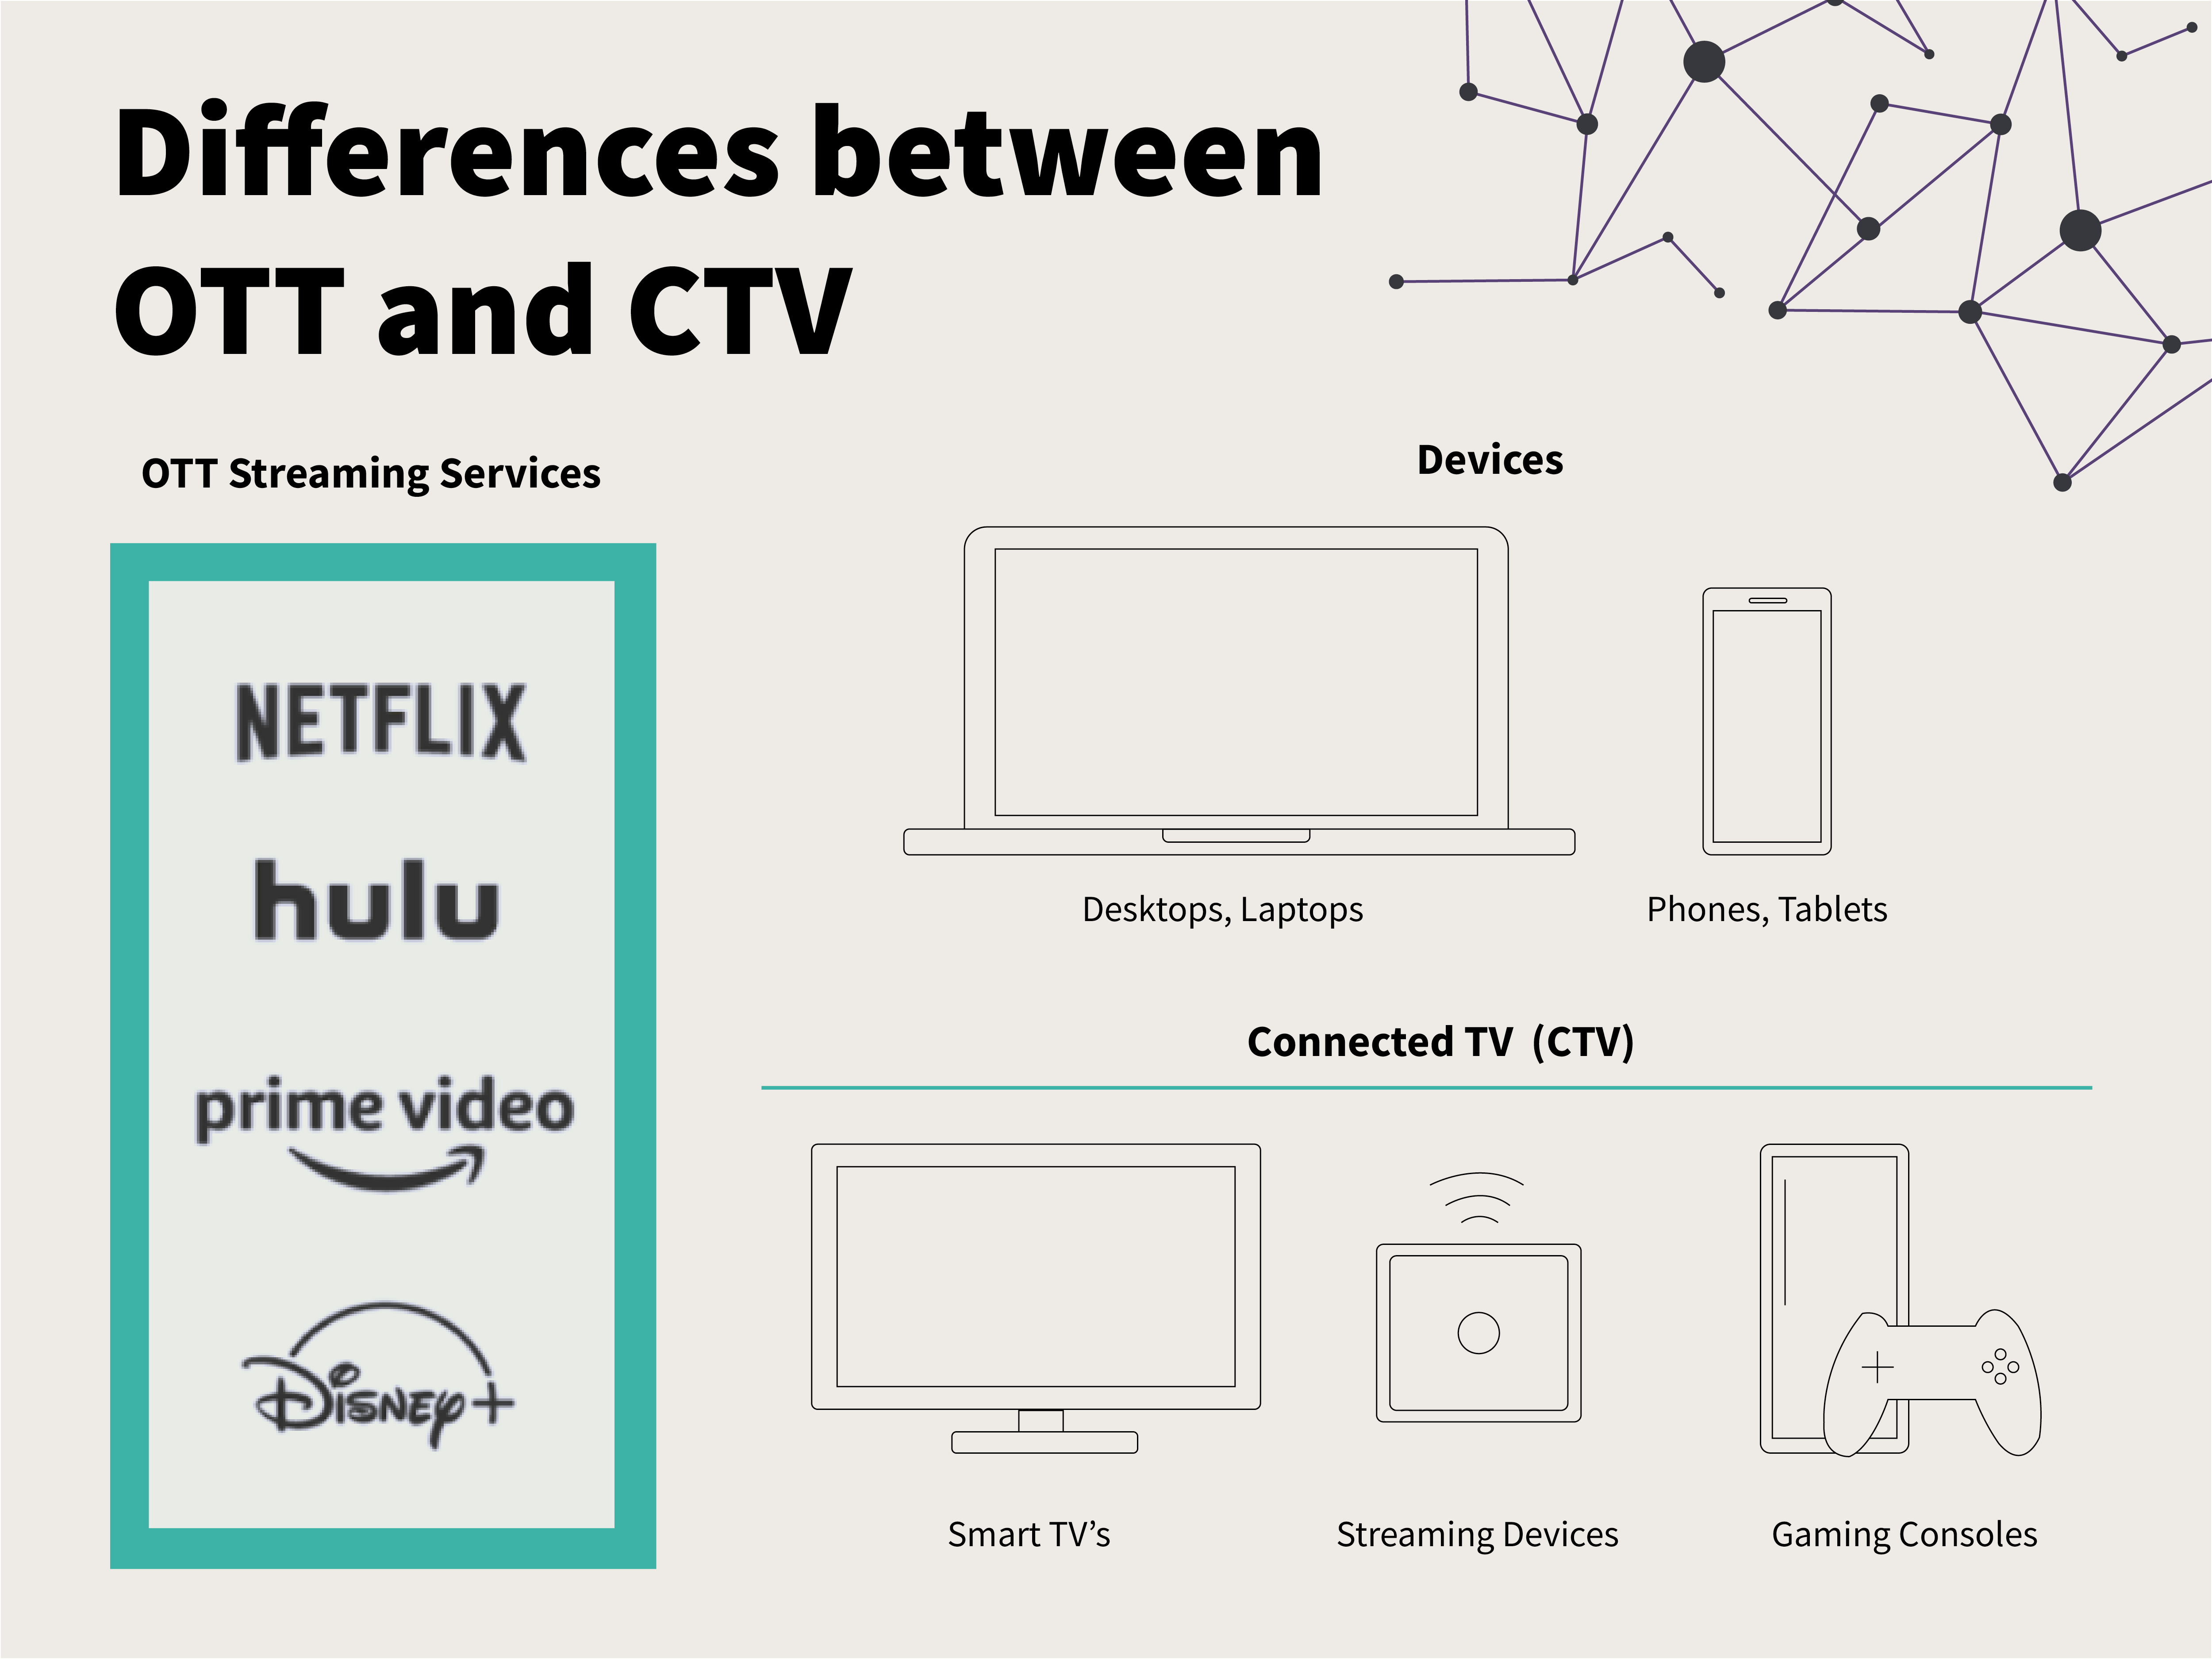 Differences between OTT and CTV